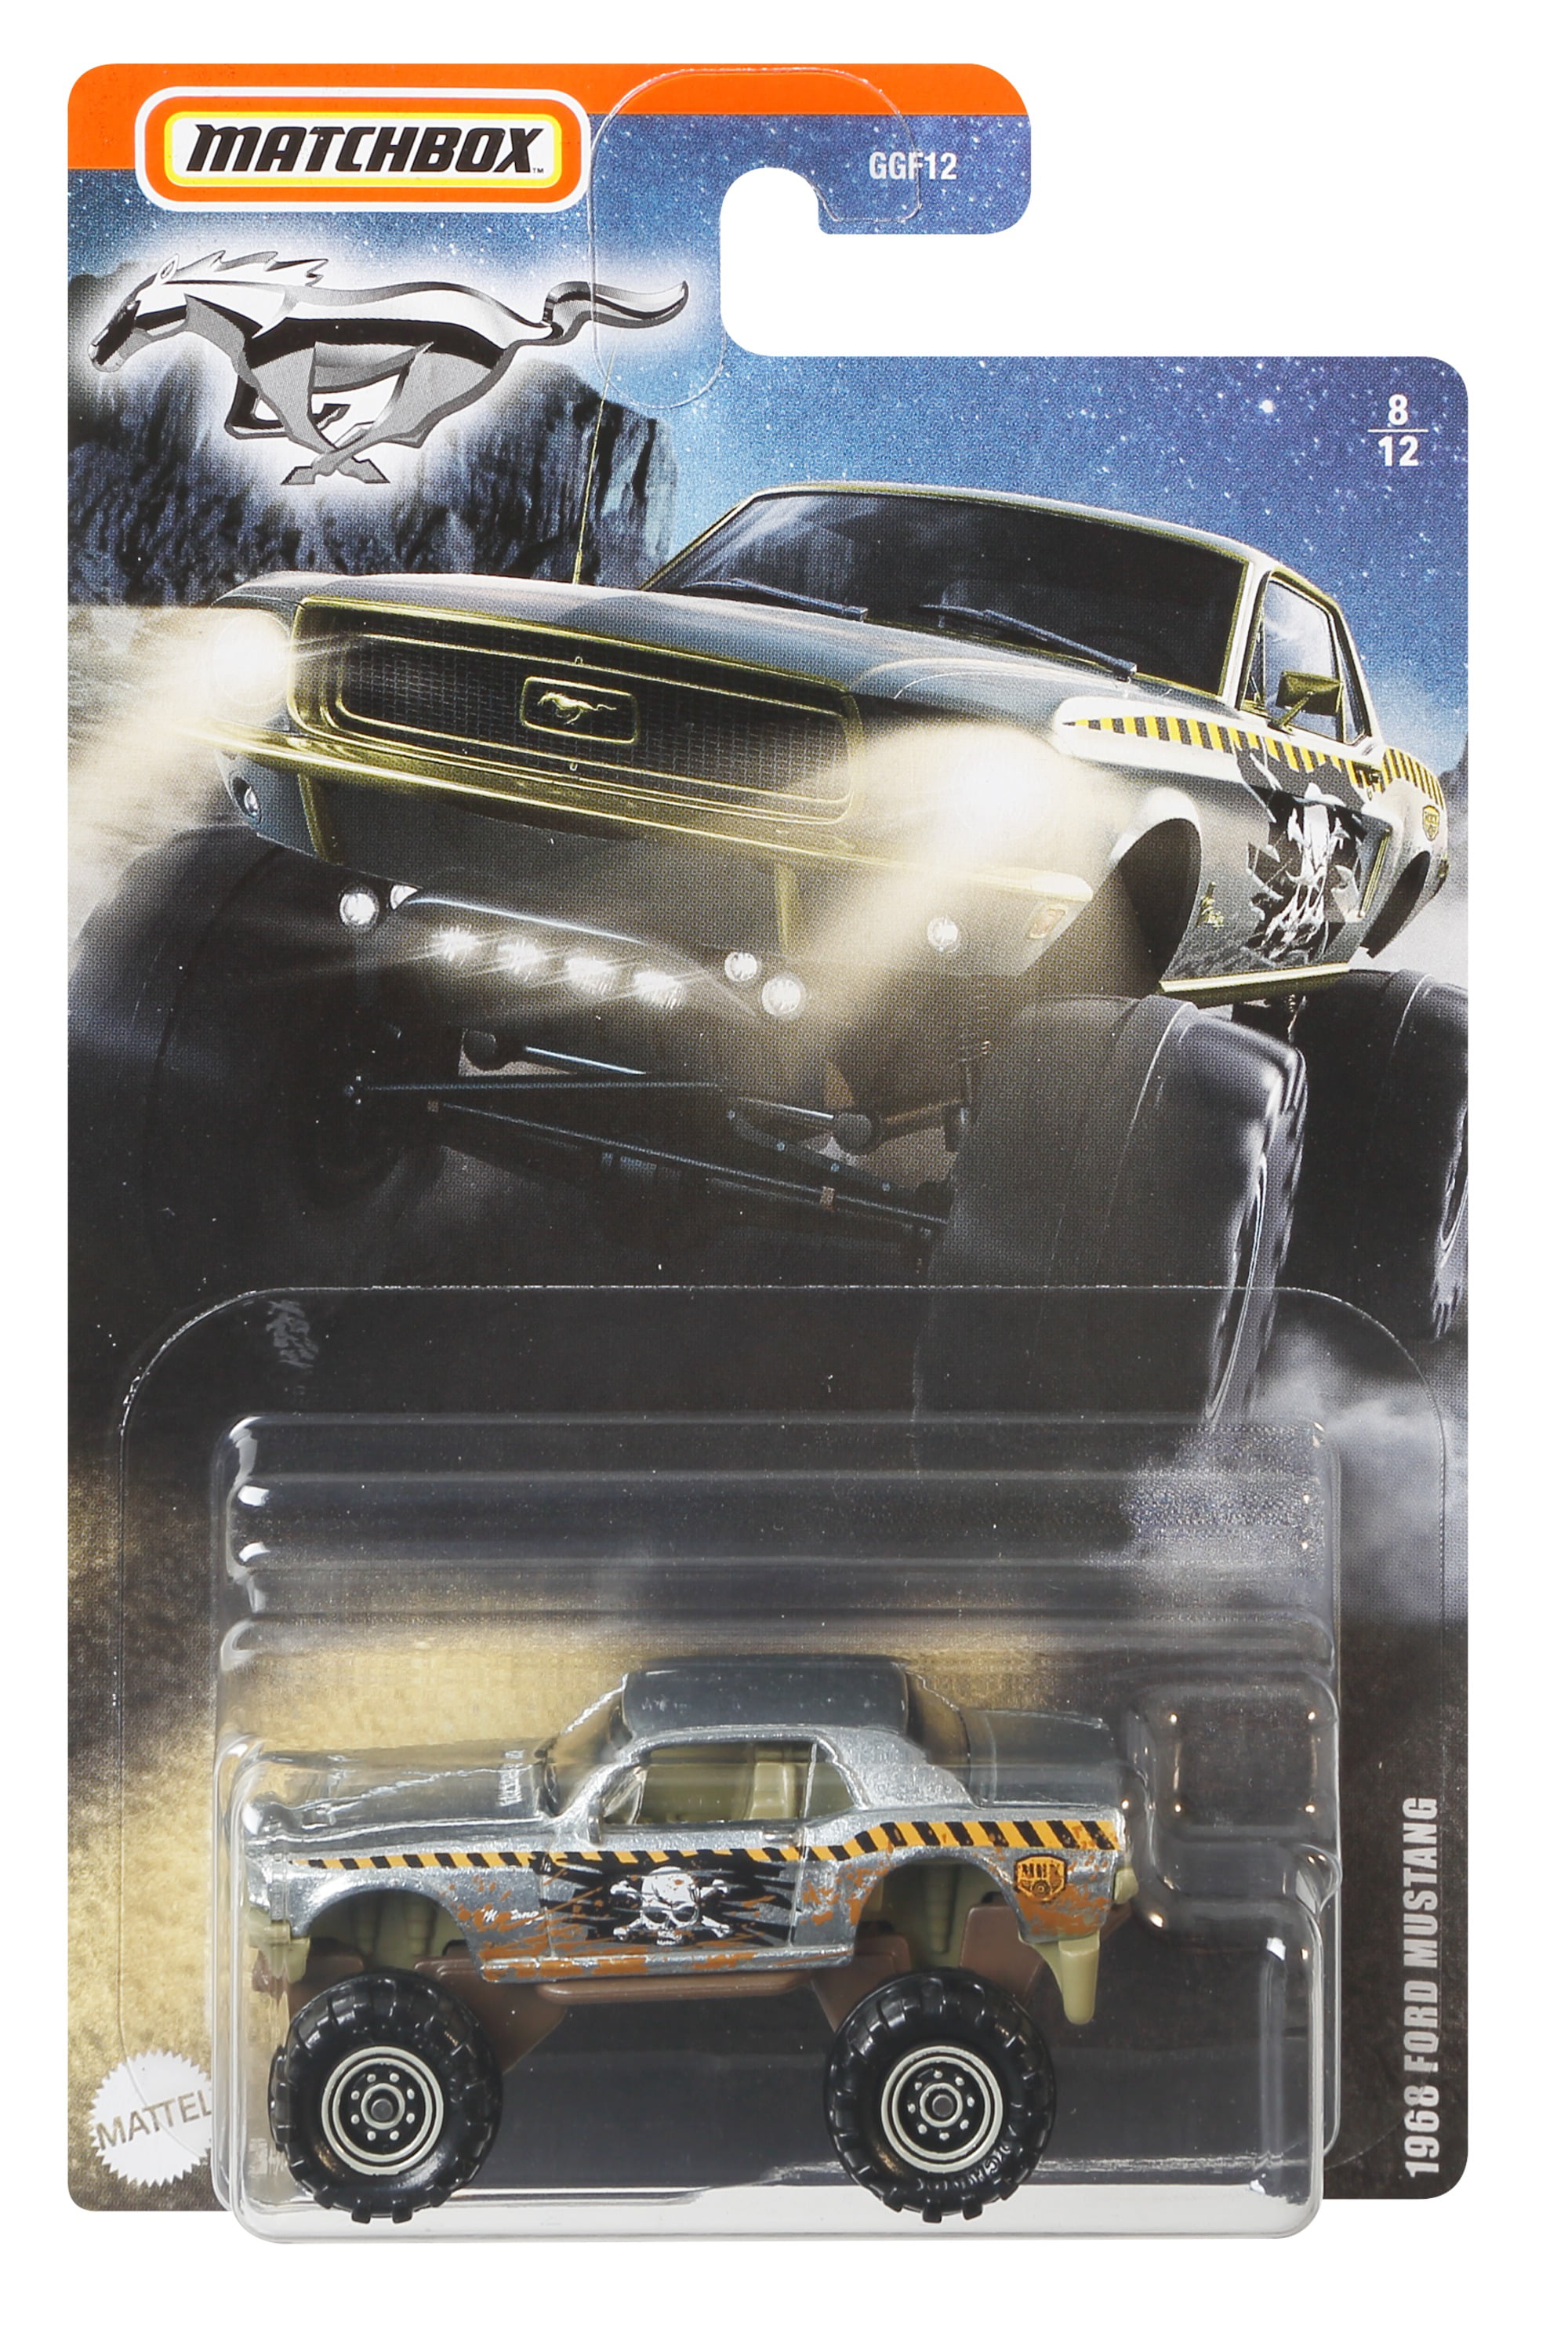 Details about   Matchbox 2019 Mustang Series 8/12-1968 Ford Mustang 4x4 Off-Road Lifted GTL08 